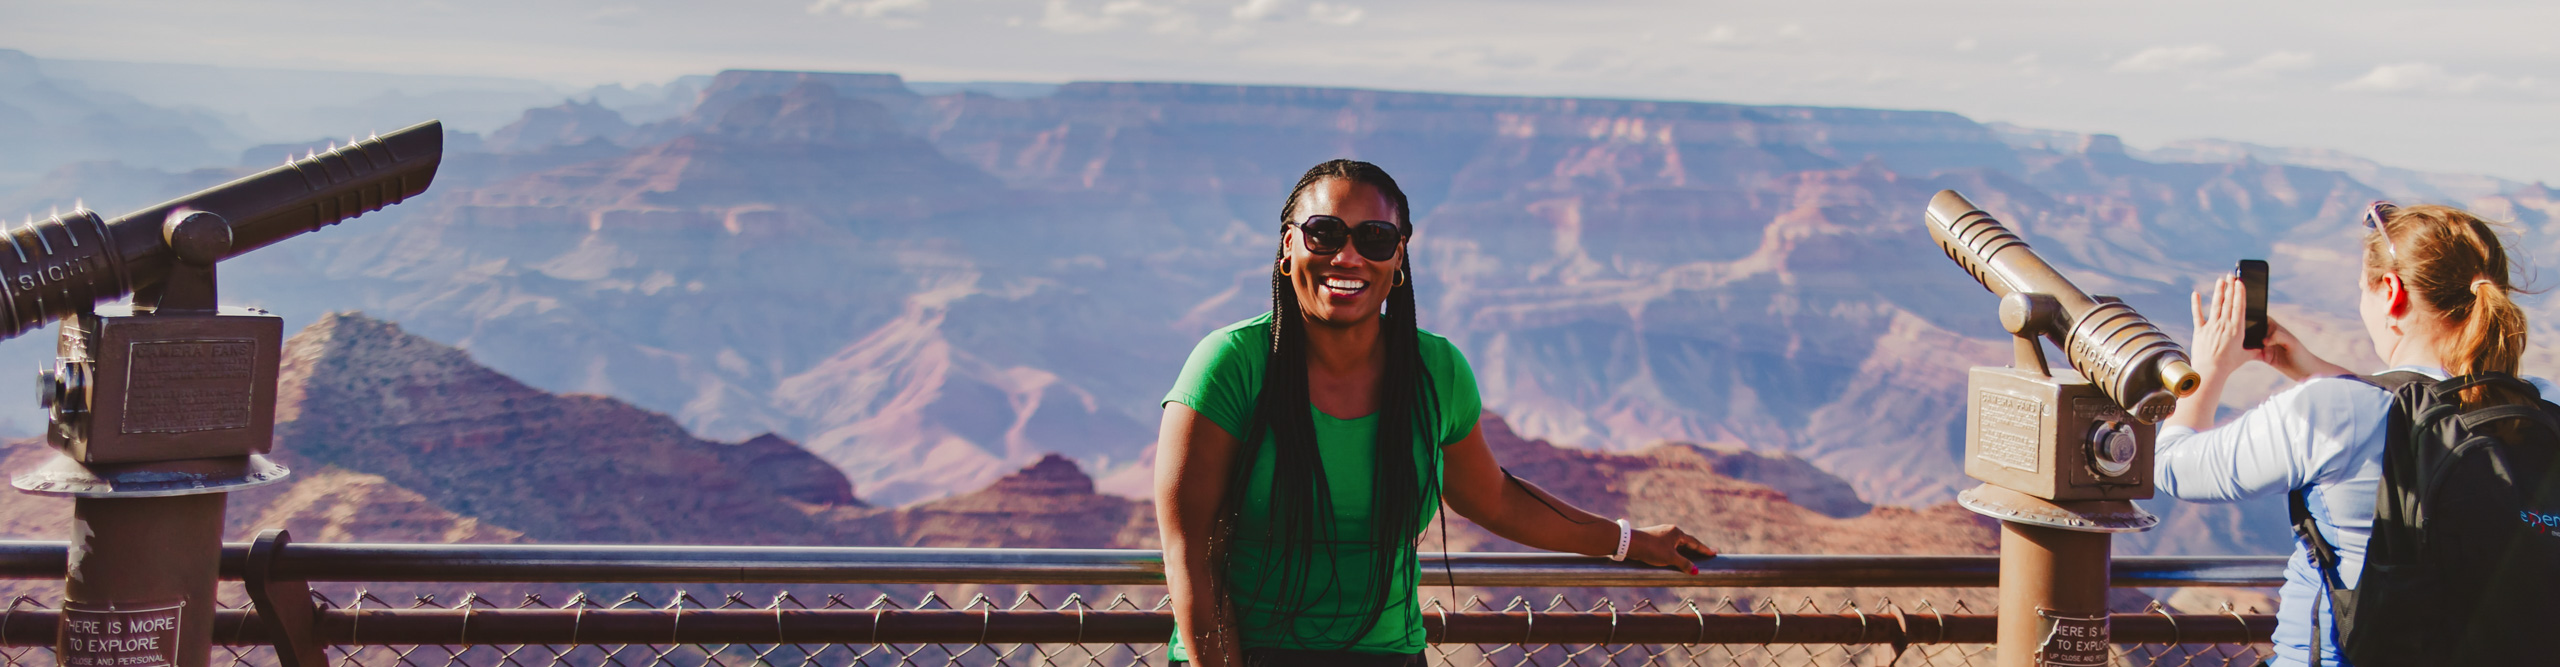 Traveller at Lookout over Grand Canyon smiling and having their picture taken, Arizonal, USA